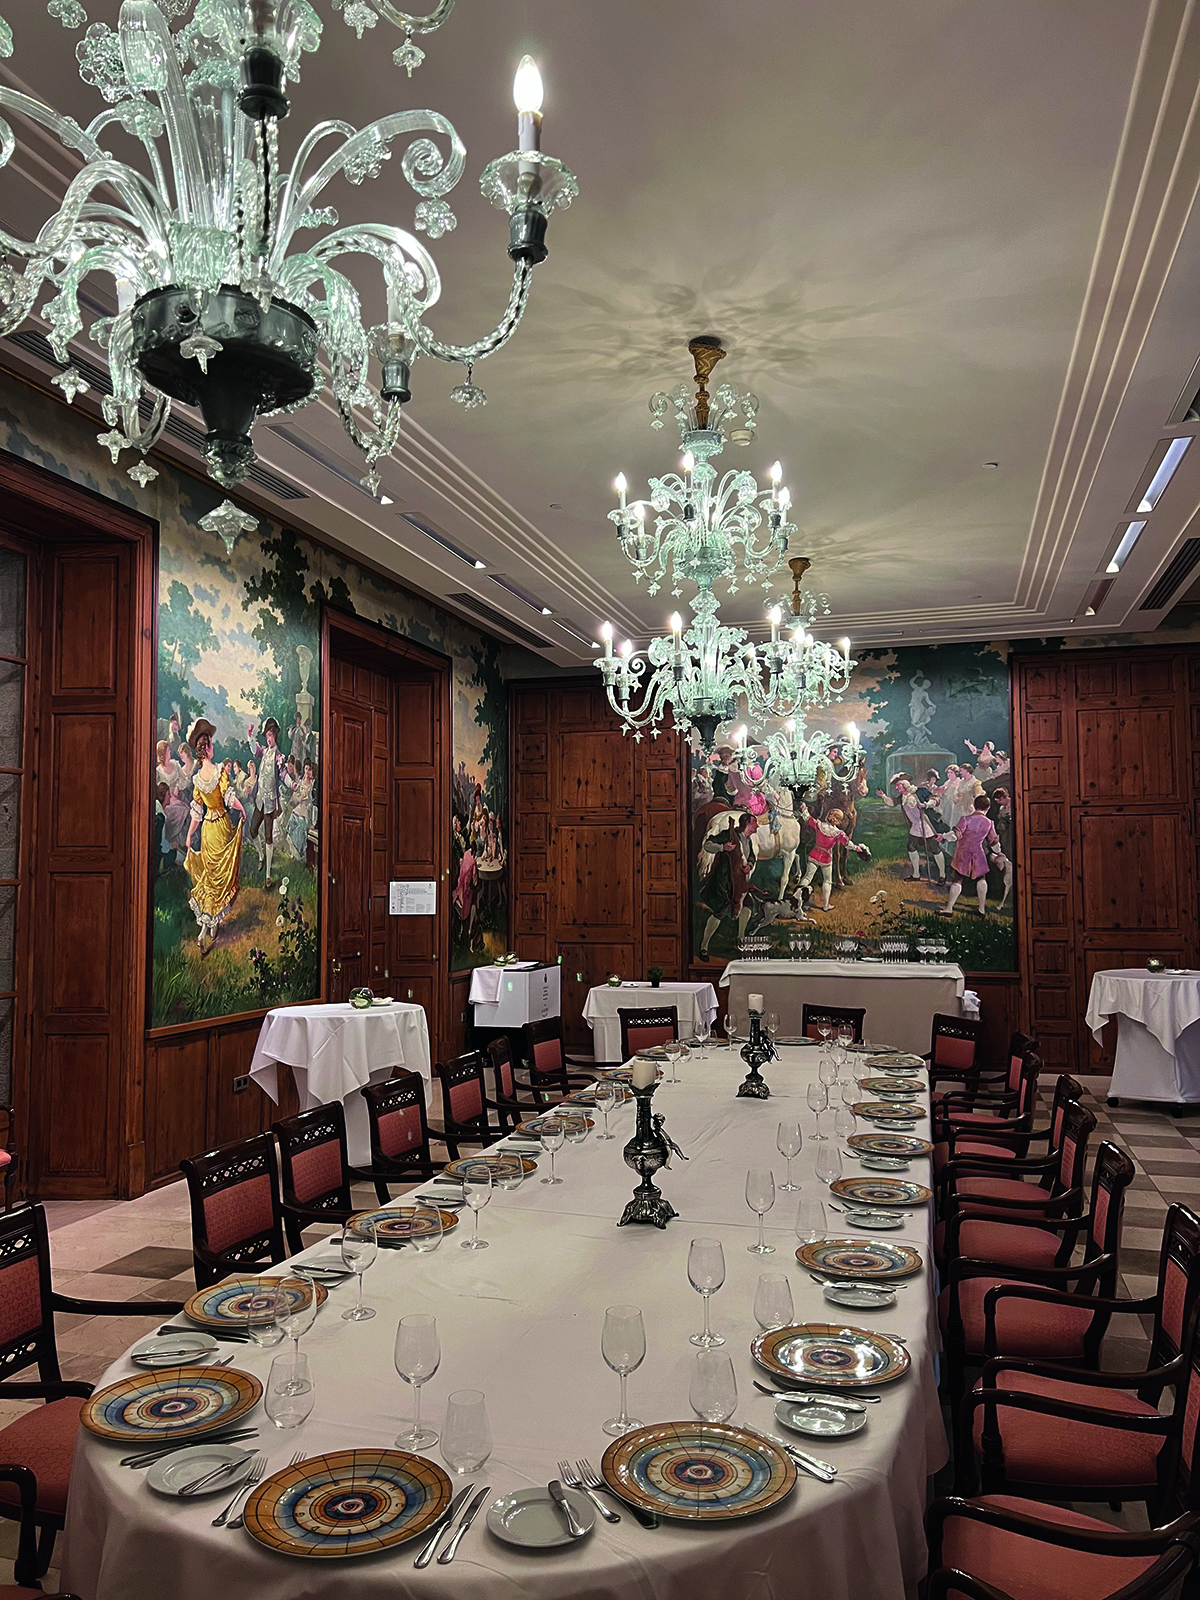 A dining room with wooden walls and large glass chandeliers over the table